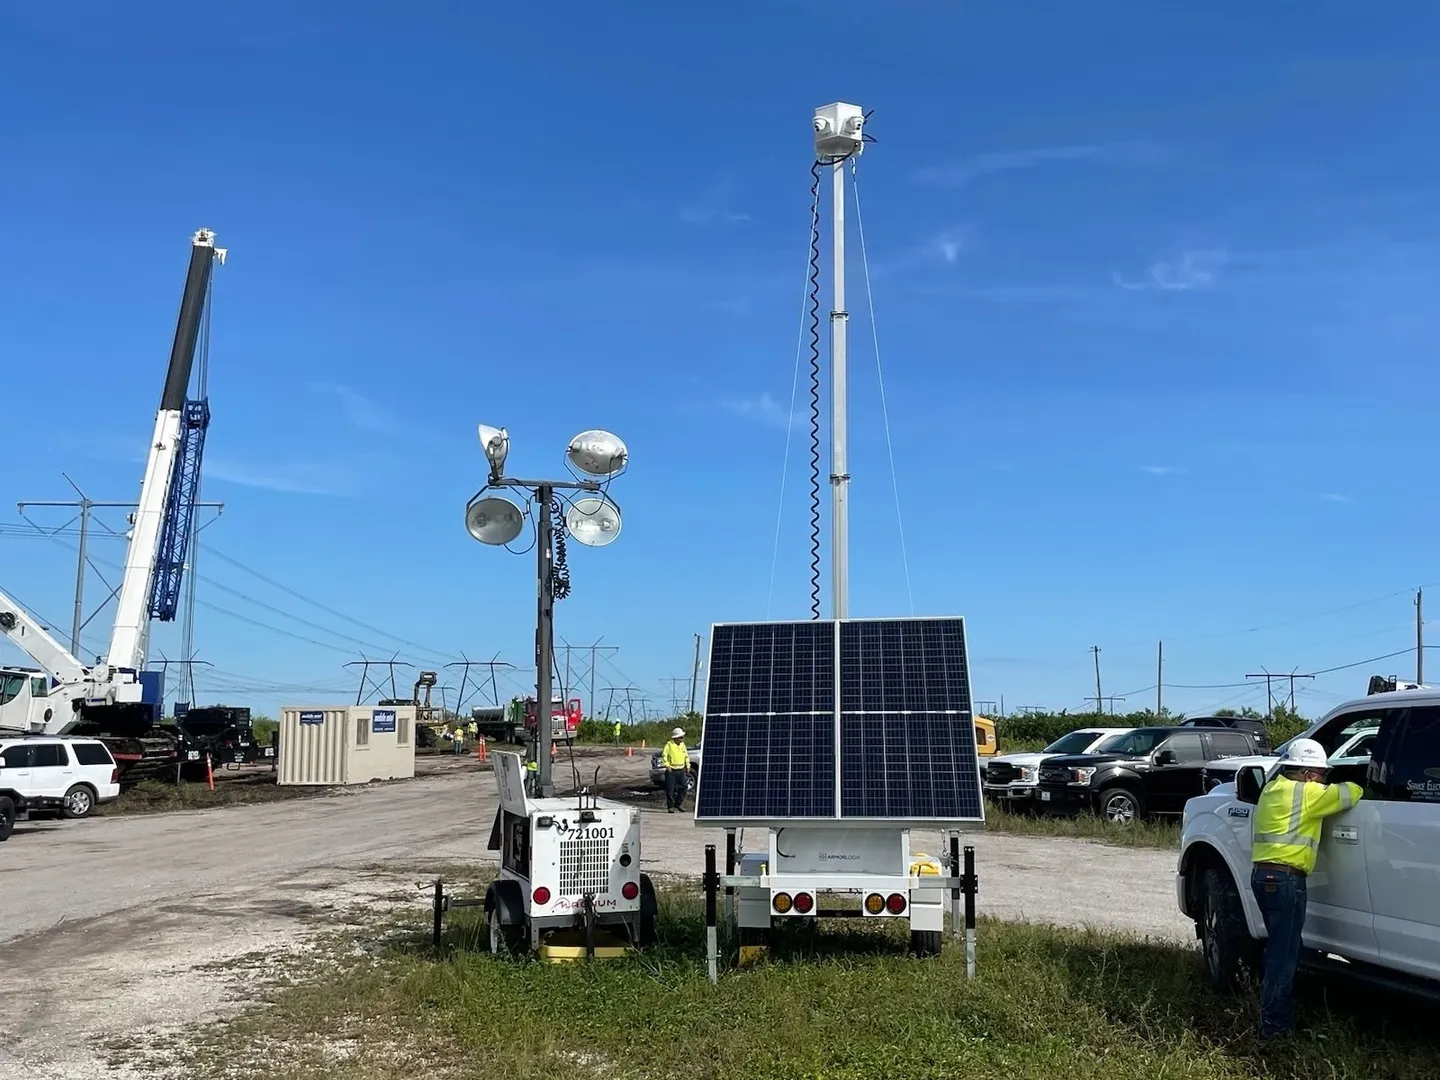 A solar powered light tower on the side of a road.